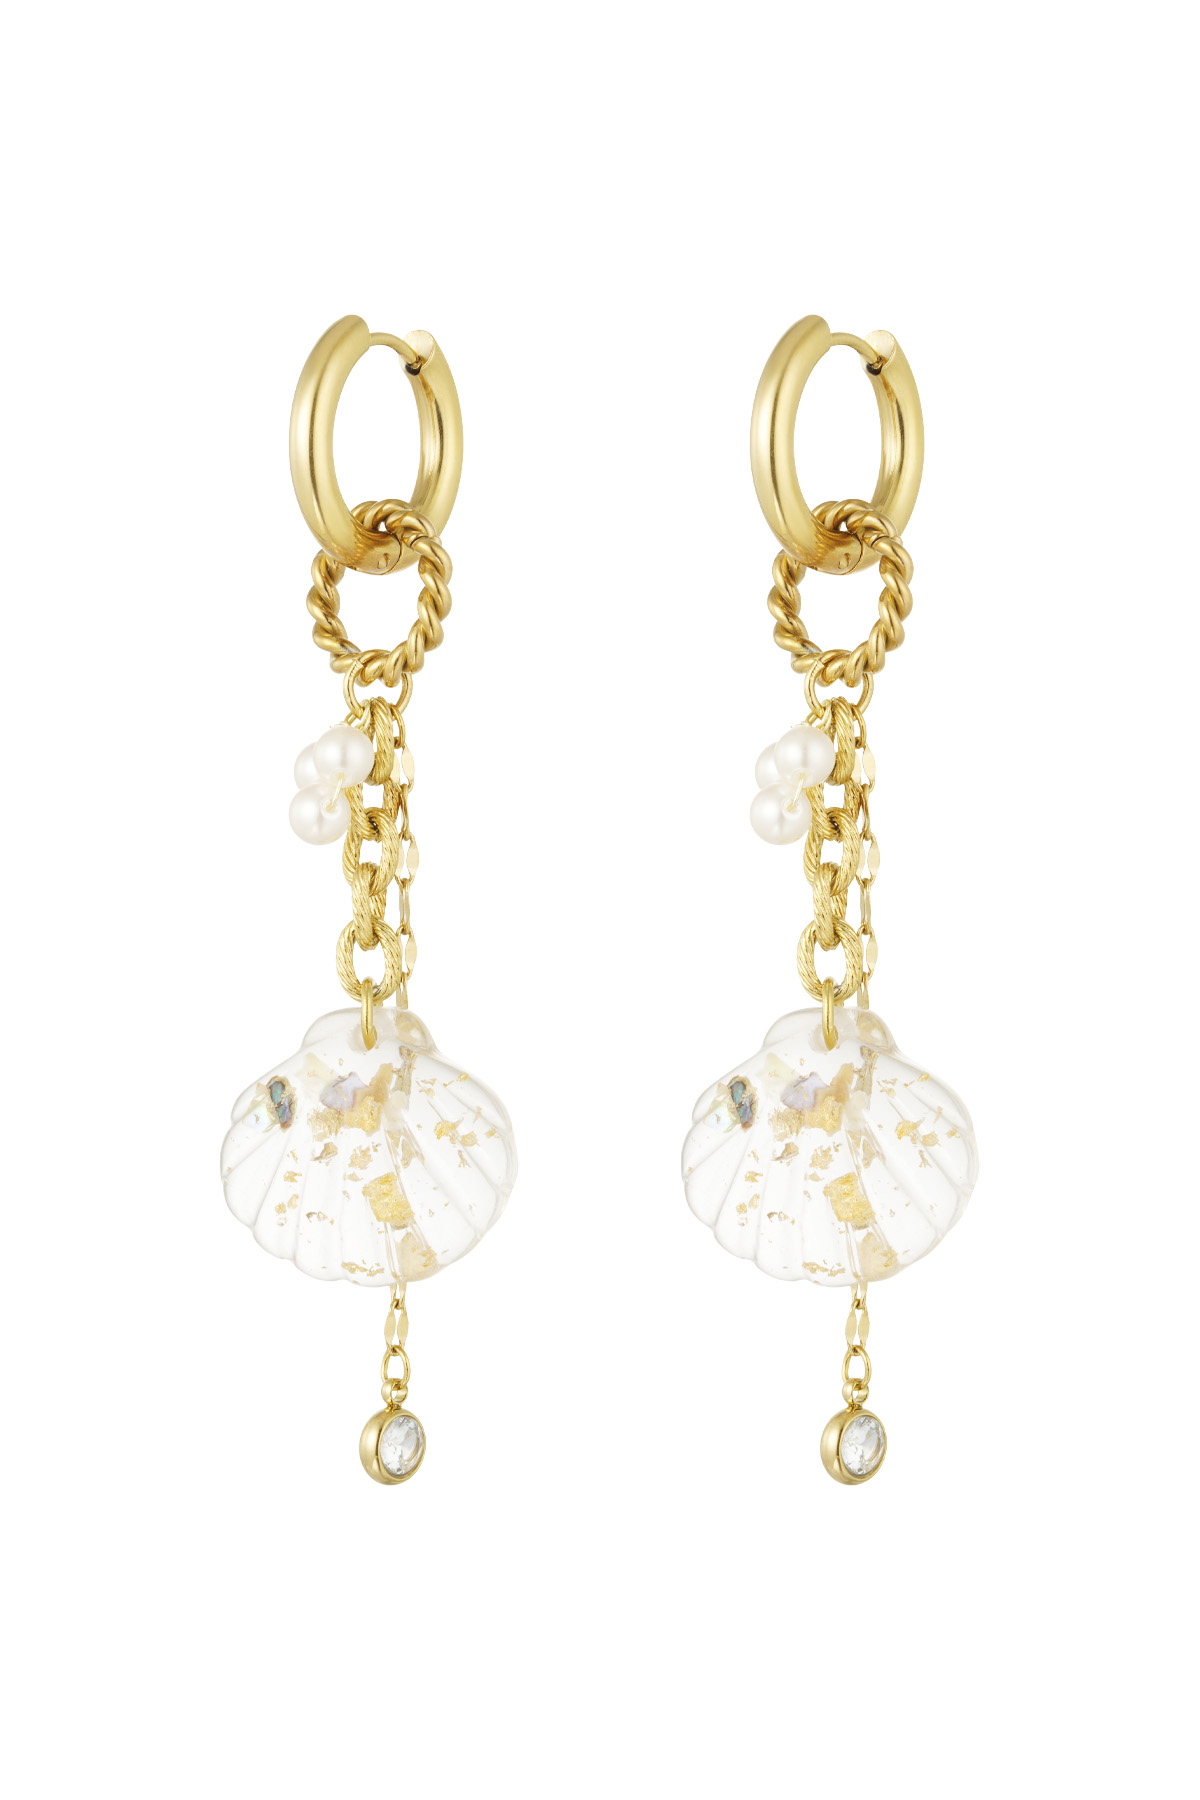 Shell earrings with charms - gold